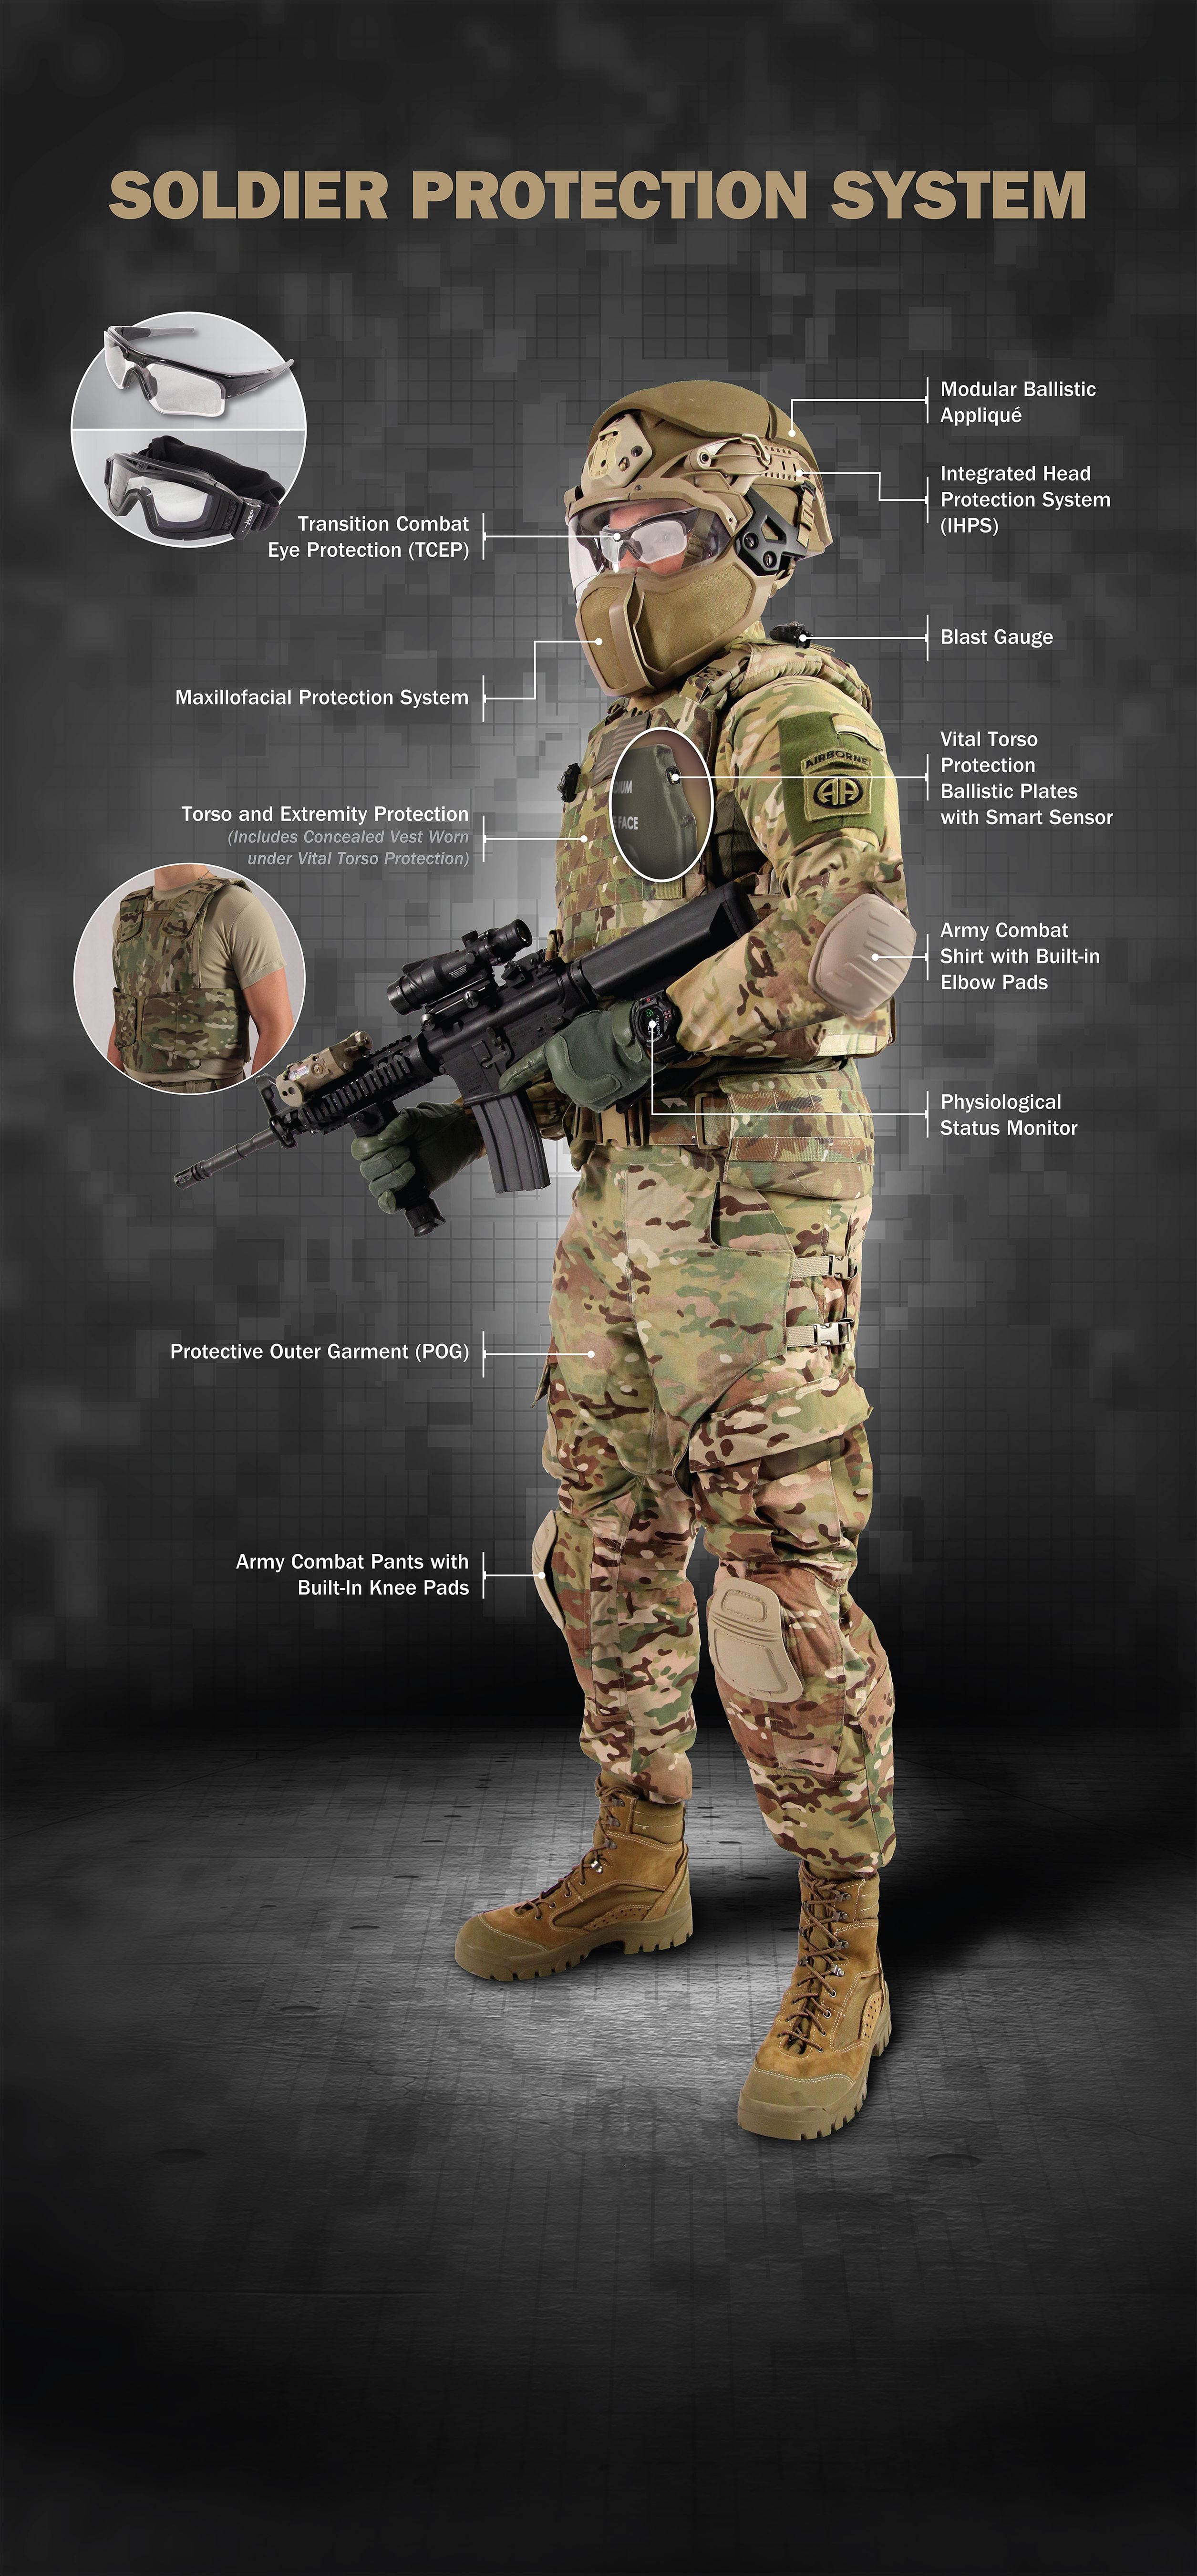 Army Issues Lighter Armor For Bigger Wars - Breaking Defense